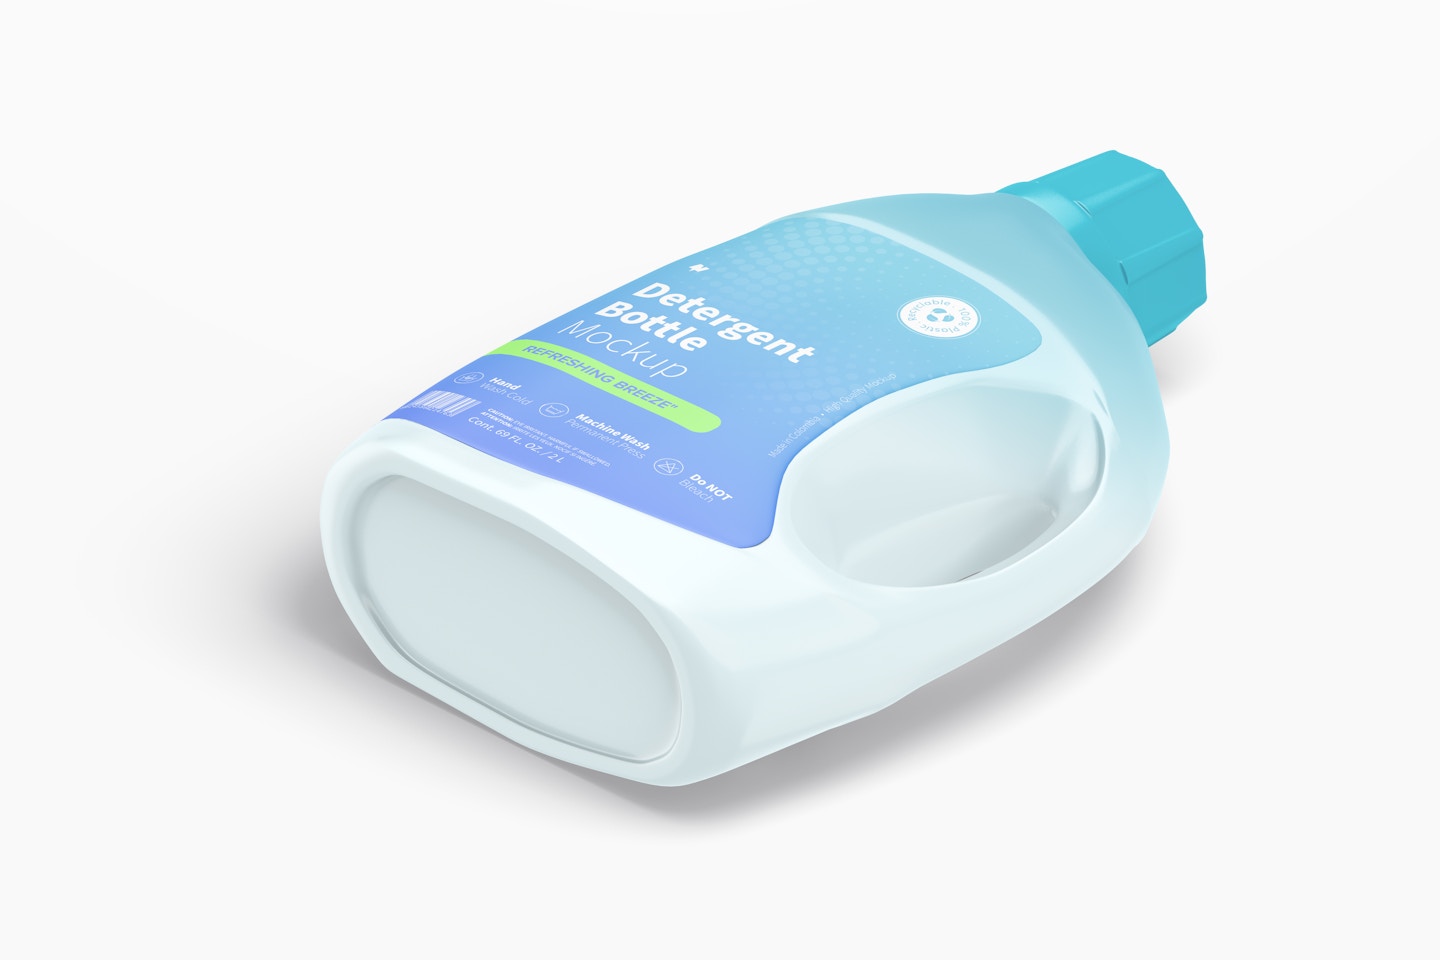 69 Oz Detergent Bottle Mockup, Isometric Dropped View